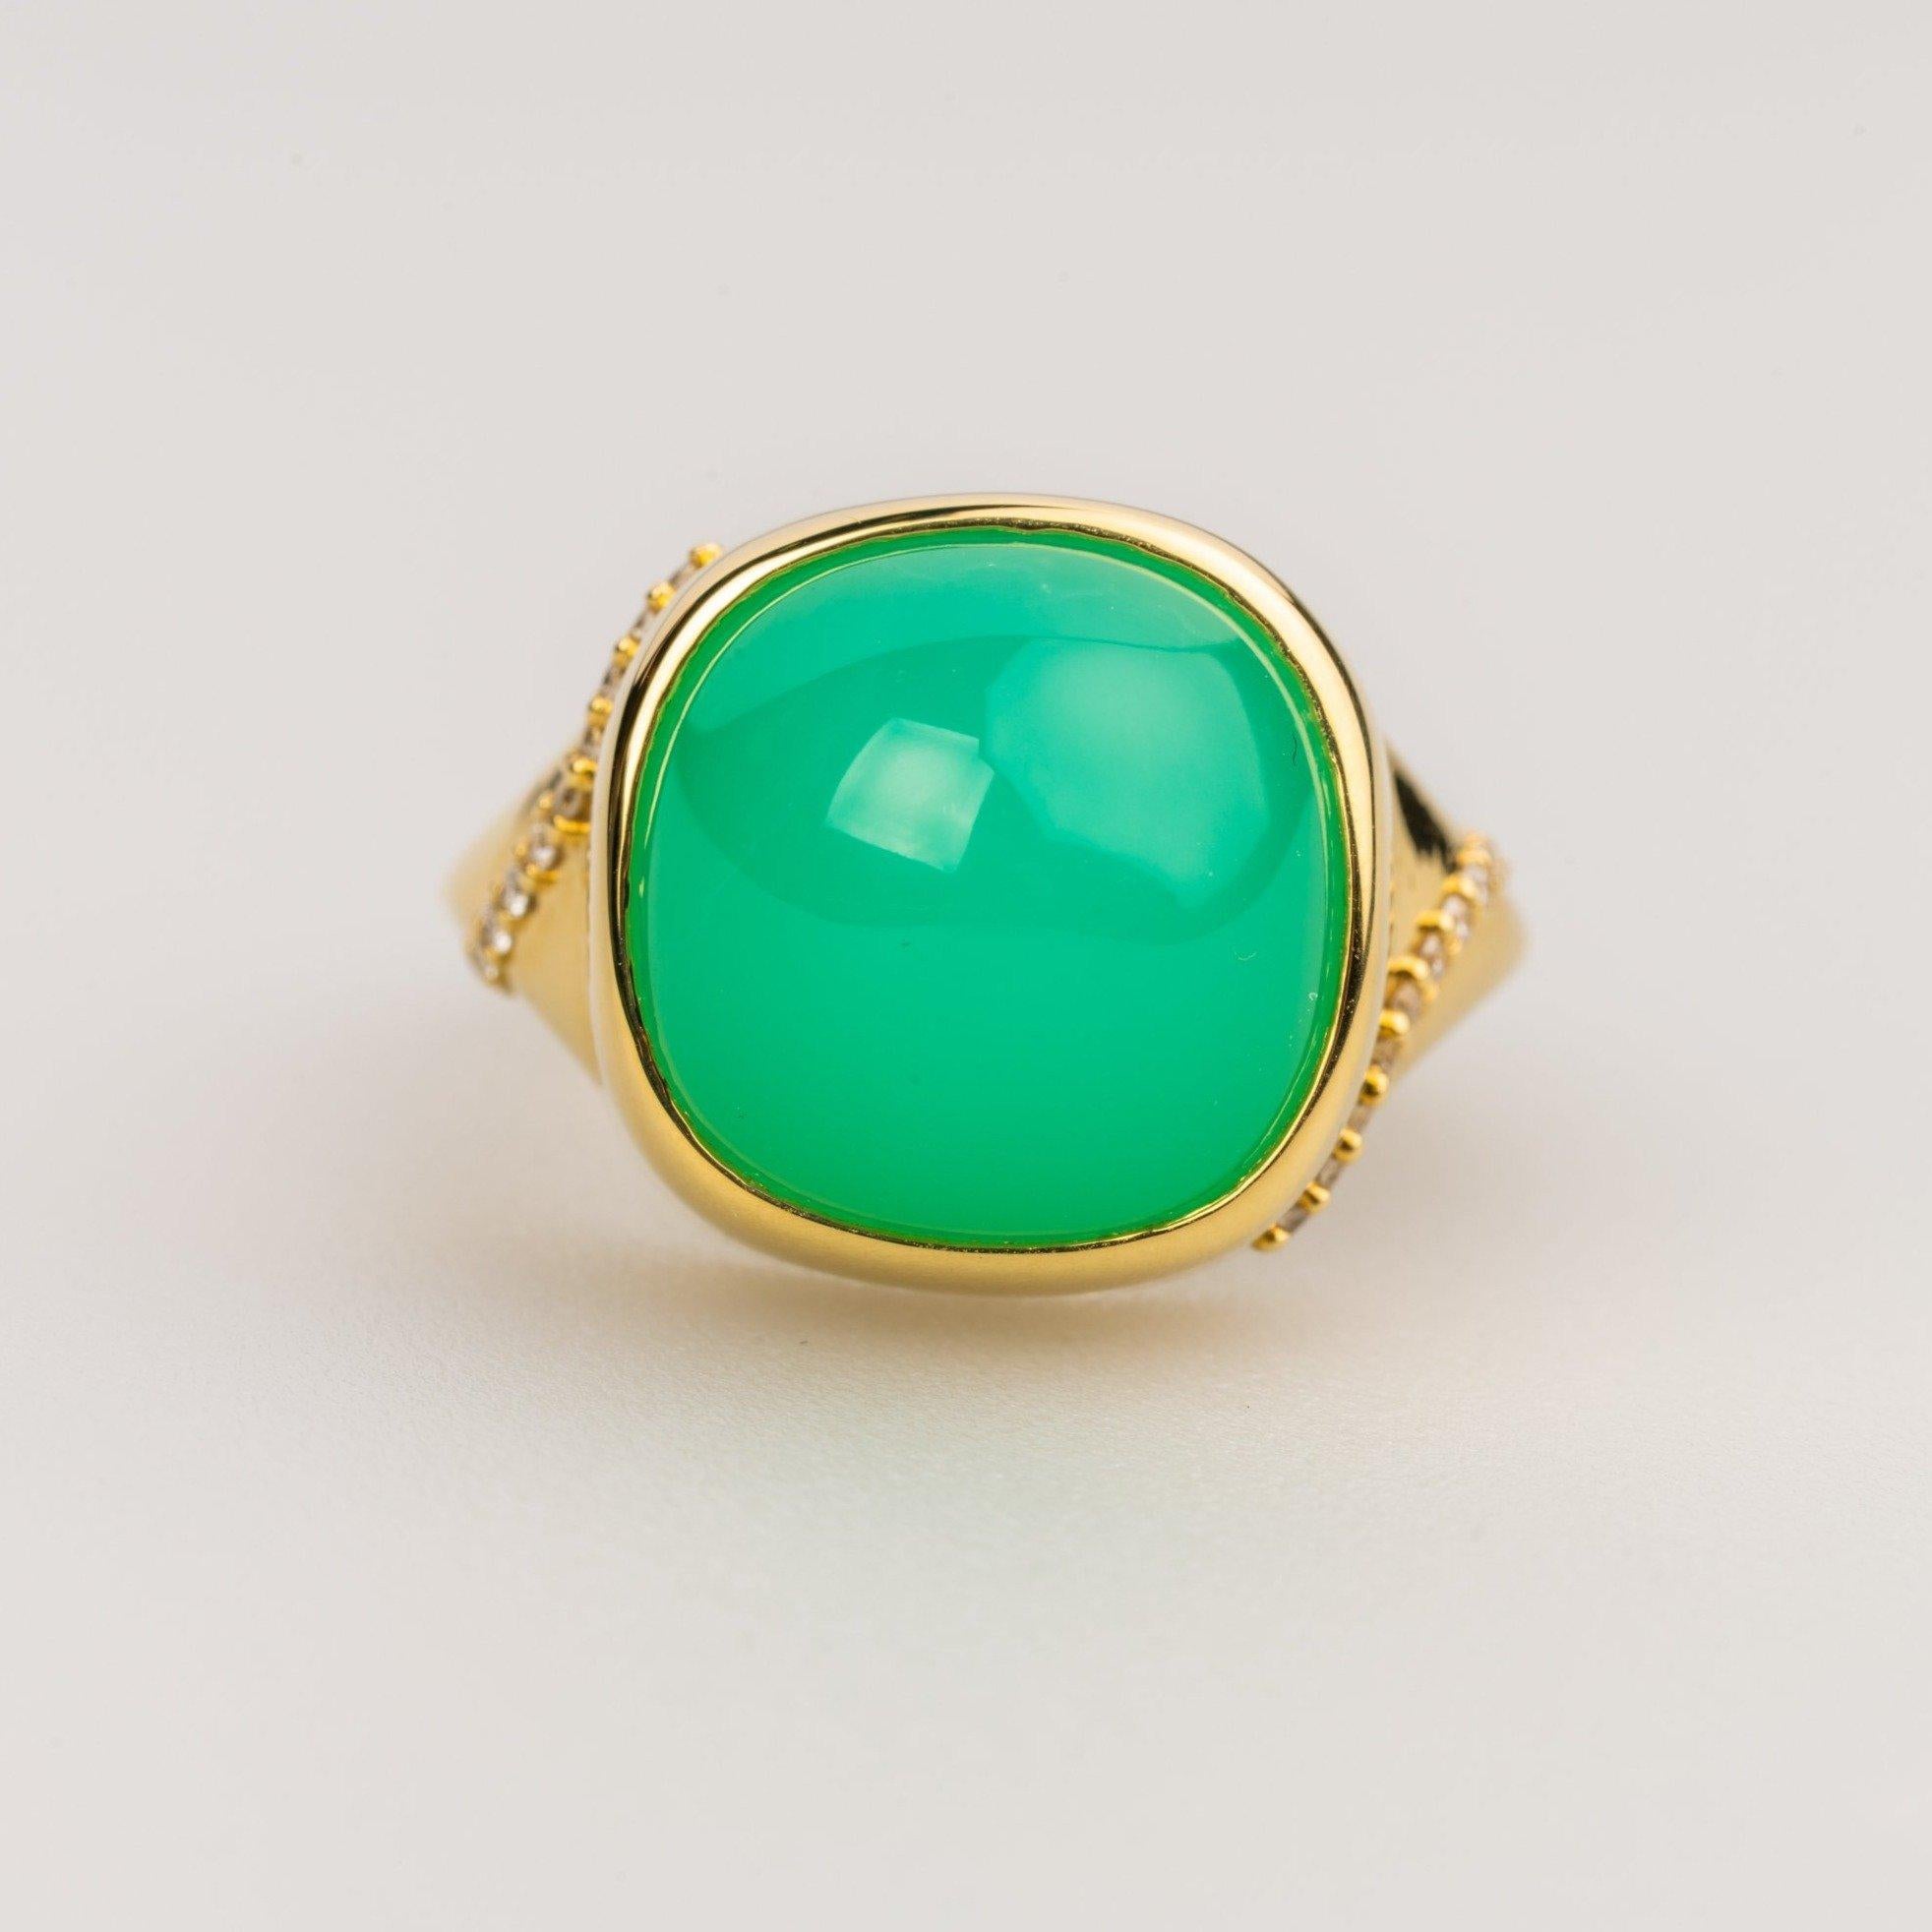 An 18k yellow gold ring featuring one bezel set cushion cut green chrysoprase and accented by 22- 1mm round full cut white diamonds F color VS clarity .11 carats. Ring size 7. This ring was designed and made by Sydney Strong.